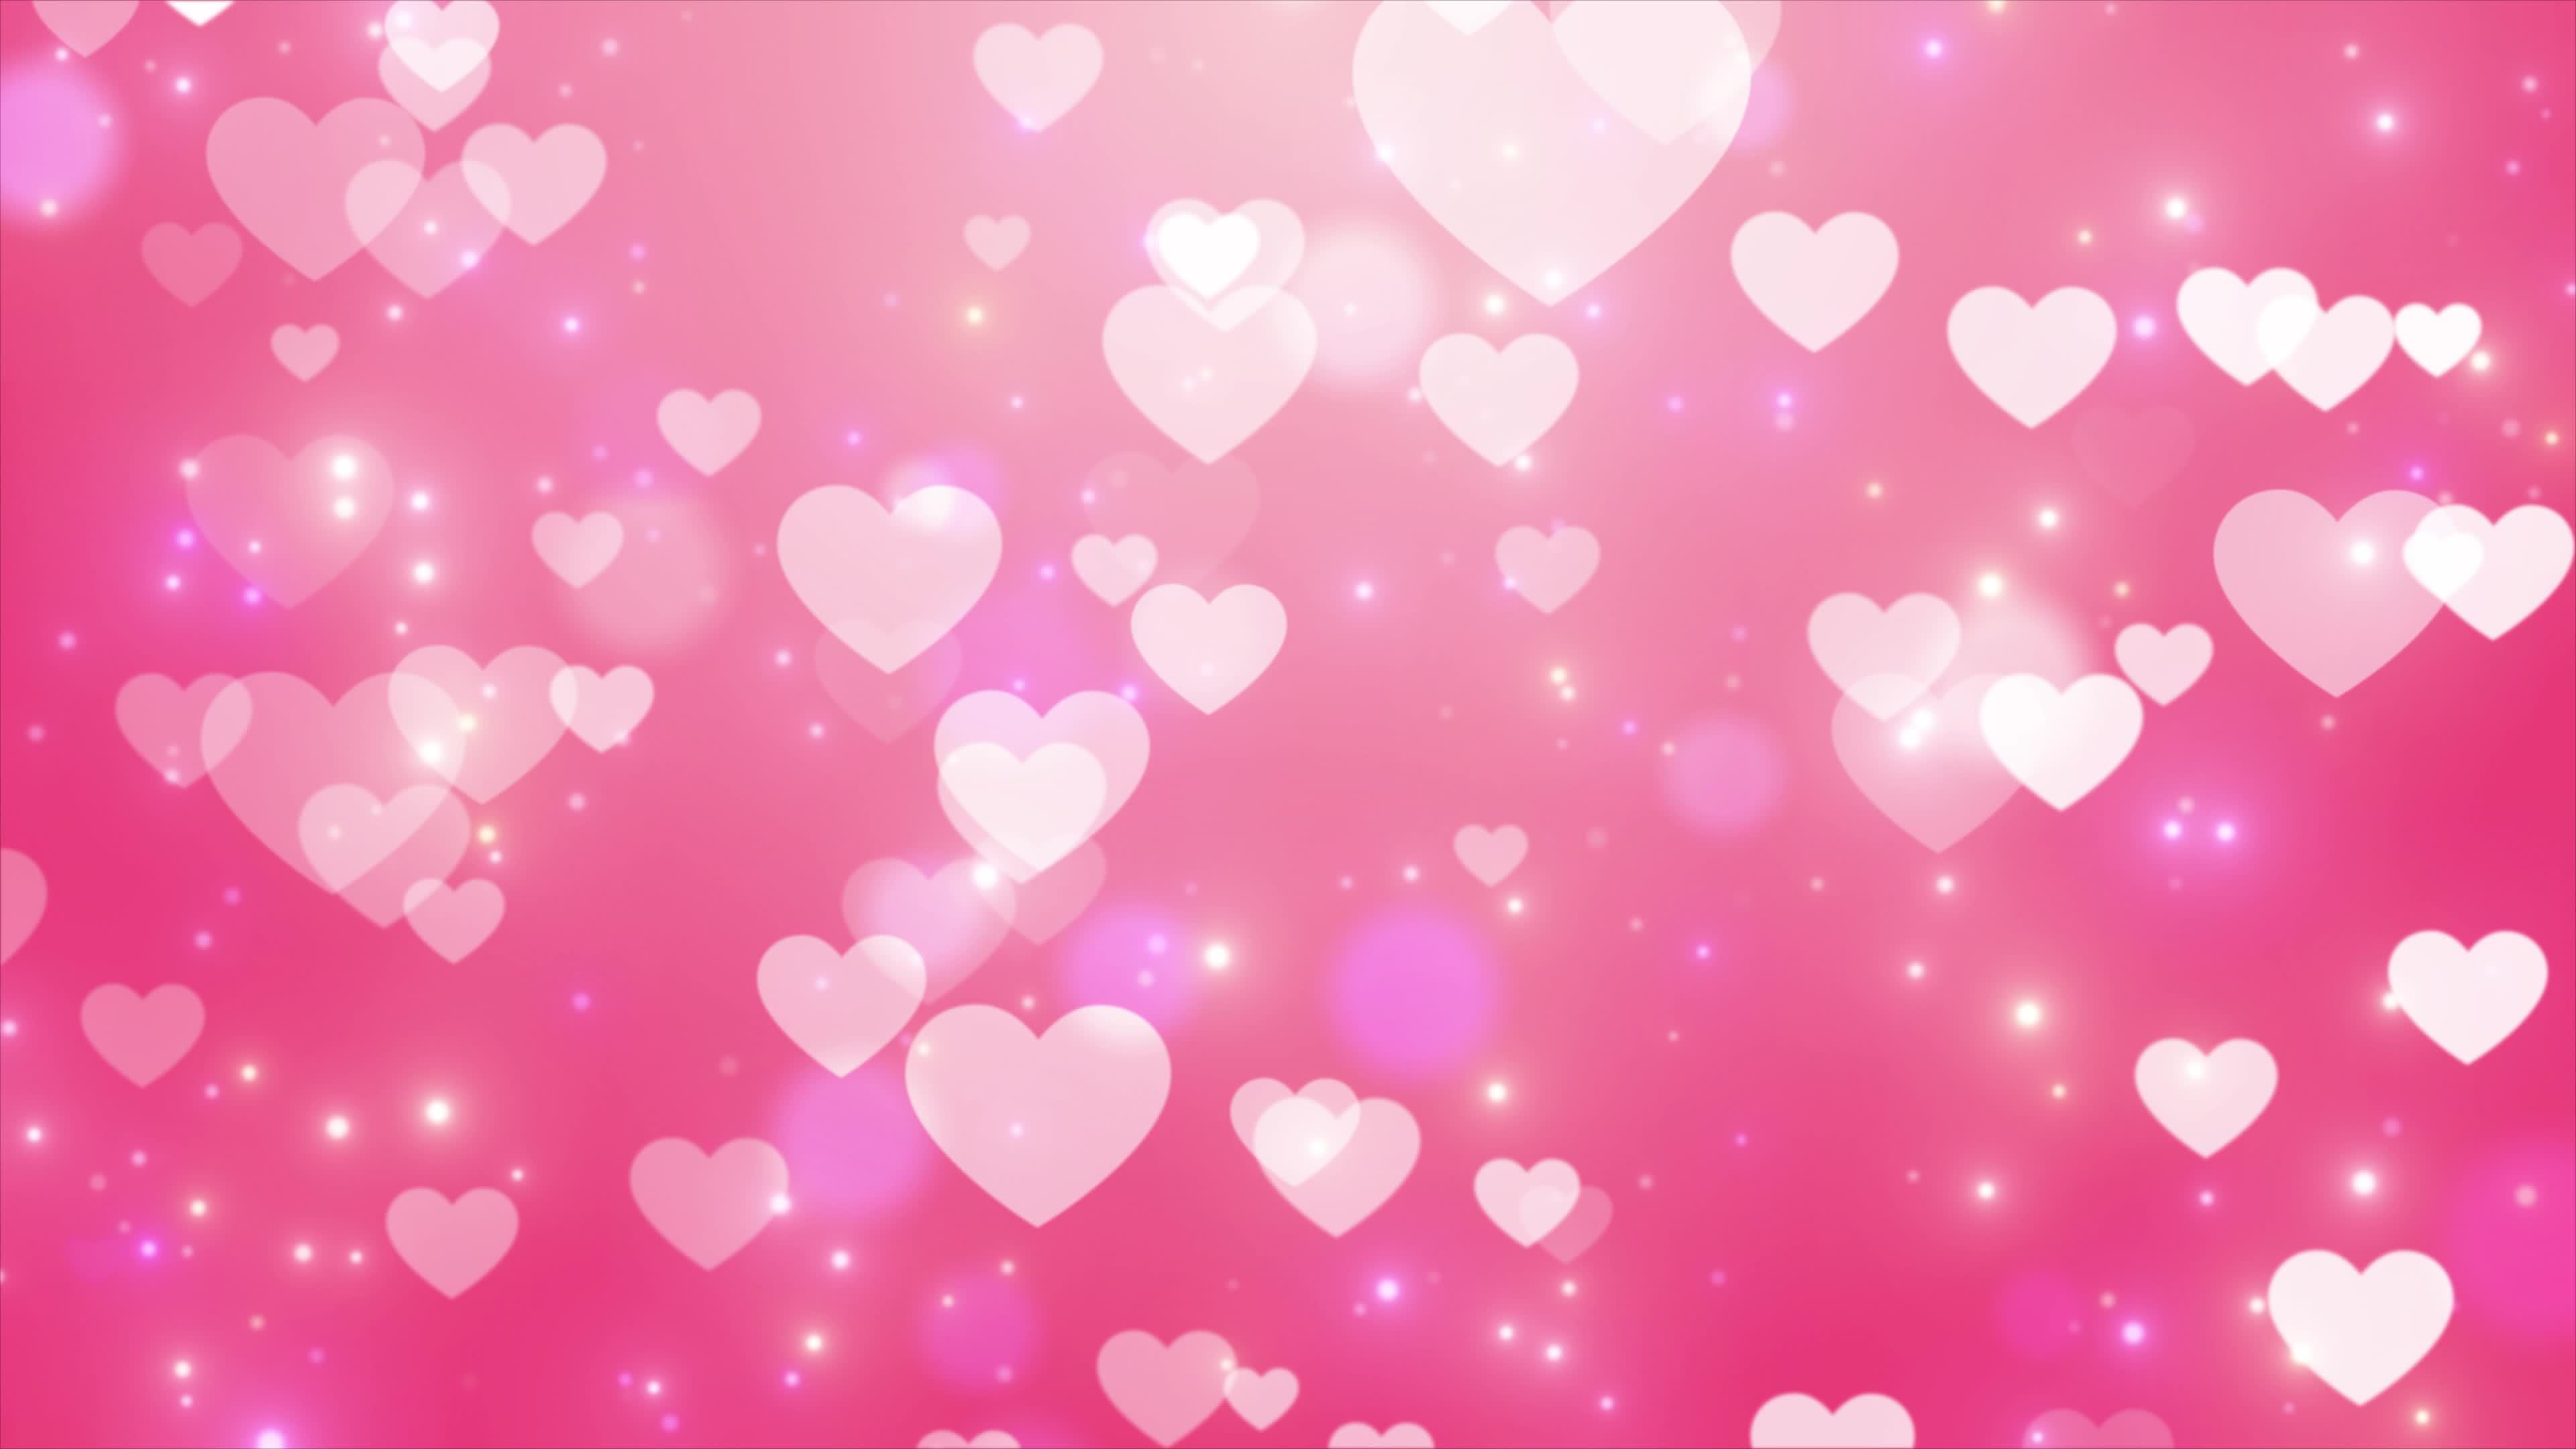 Abstract Romantic Heart Animation Background. Shining Heart Animation  Valentine Love Background, Loop Animation Of Heart Shape Flying Background  Uses For Anniversary And Marriage, Valentine's Day 14854978 Stock Video at  Vecteezy